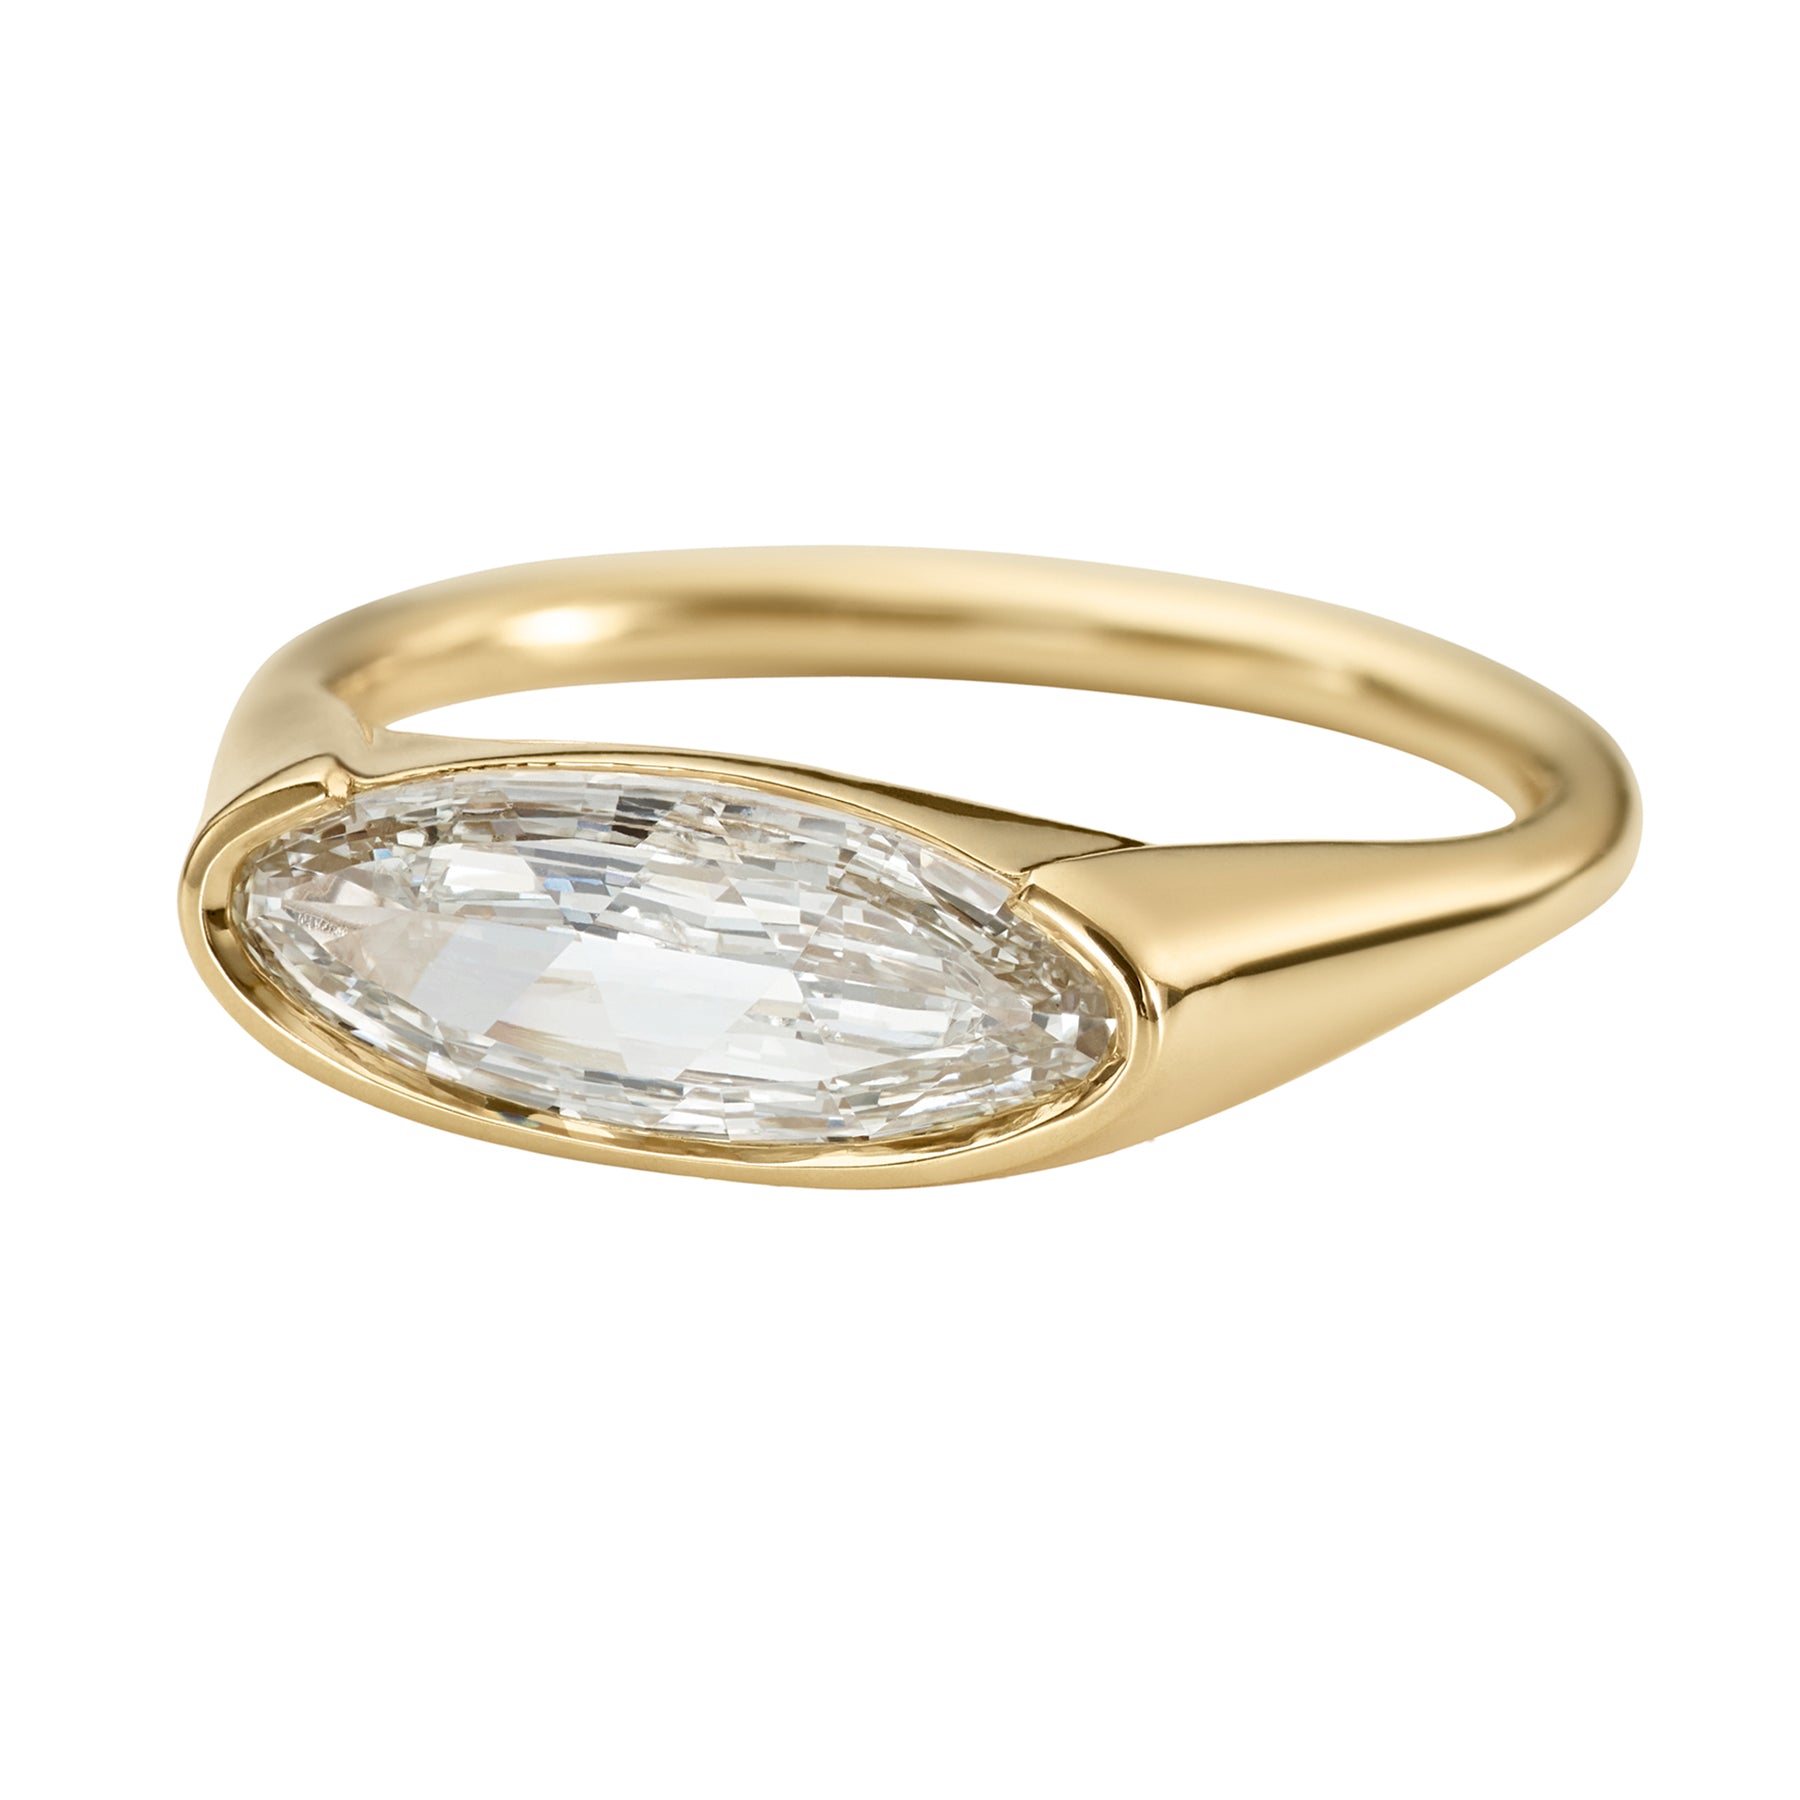 Solitaire-Diamond-Ring-in-Elongated-Moval-Cut-Packshot